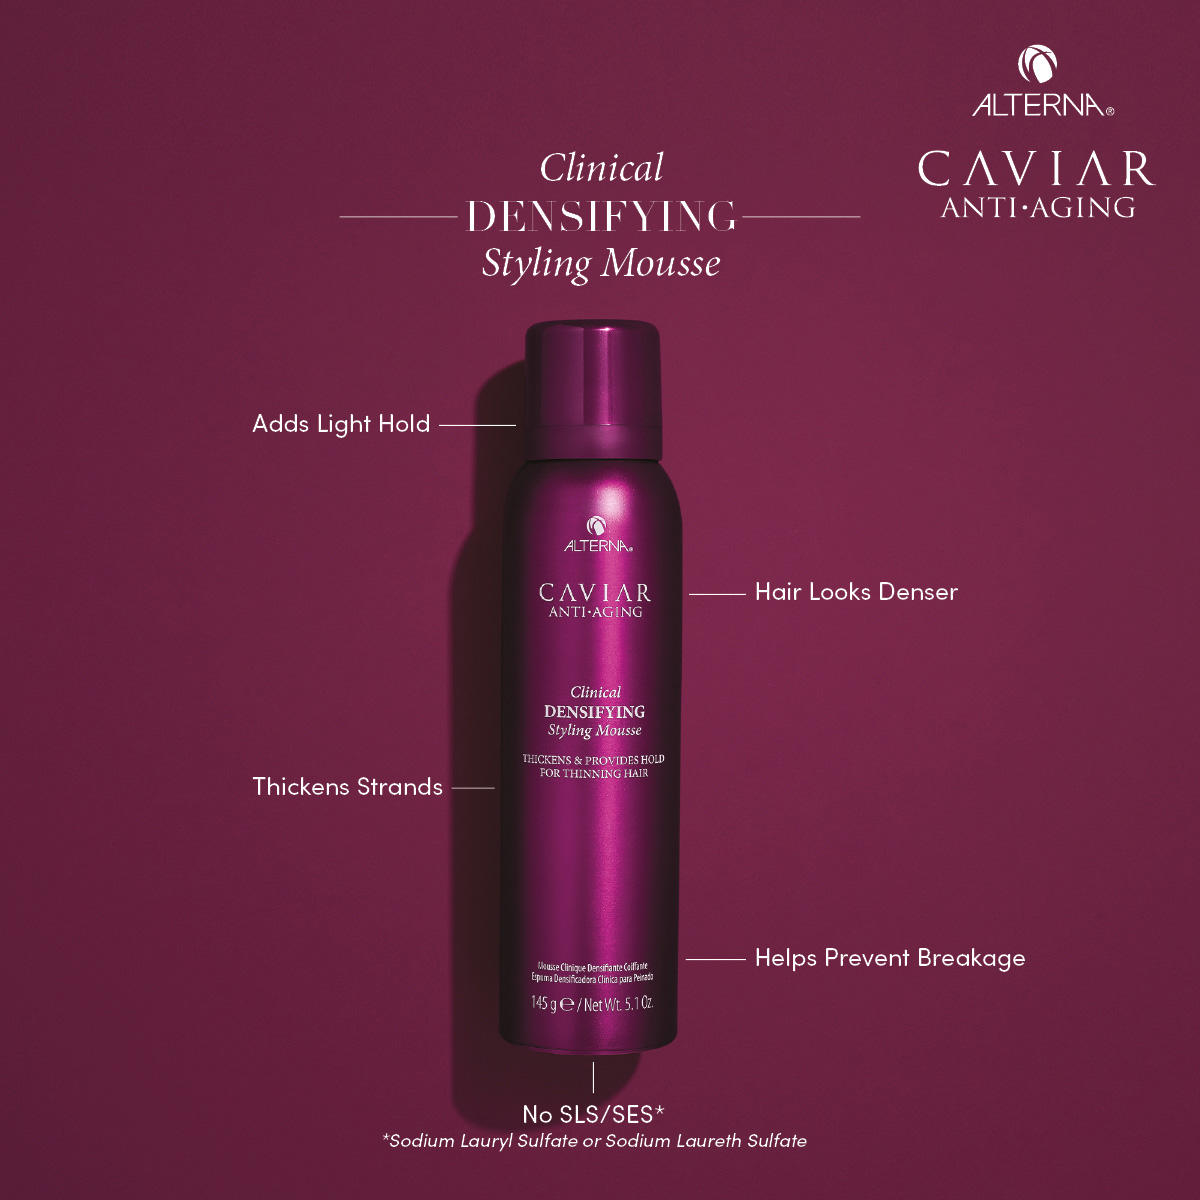 Alterna Caviar Anti-Aging Clinical Densifying Styling Mousse 145 g - 3